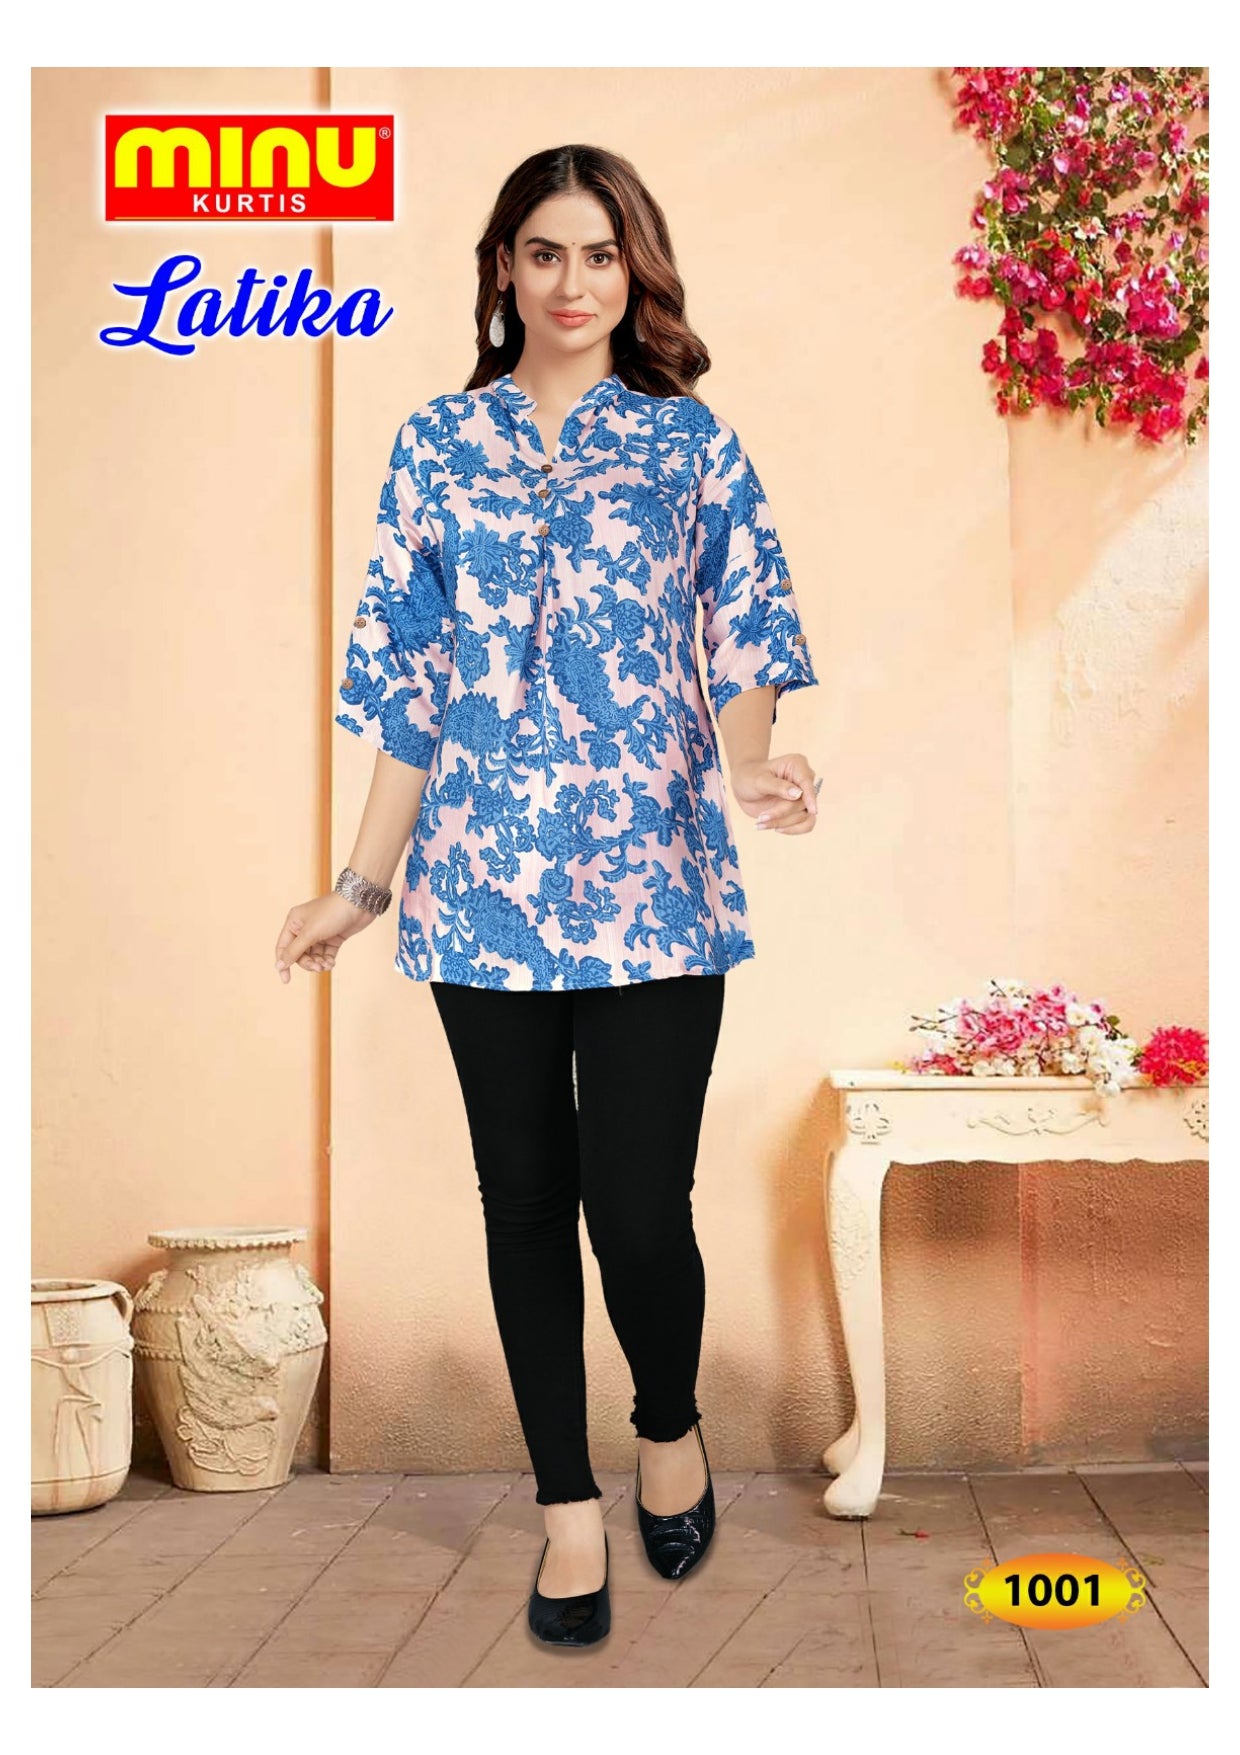 best offers on kurtis wholesale online shopping cash on delivery